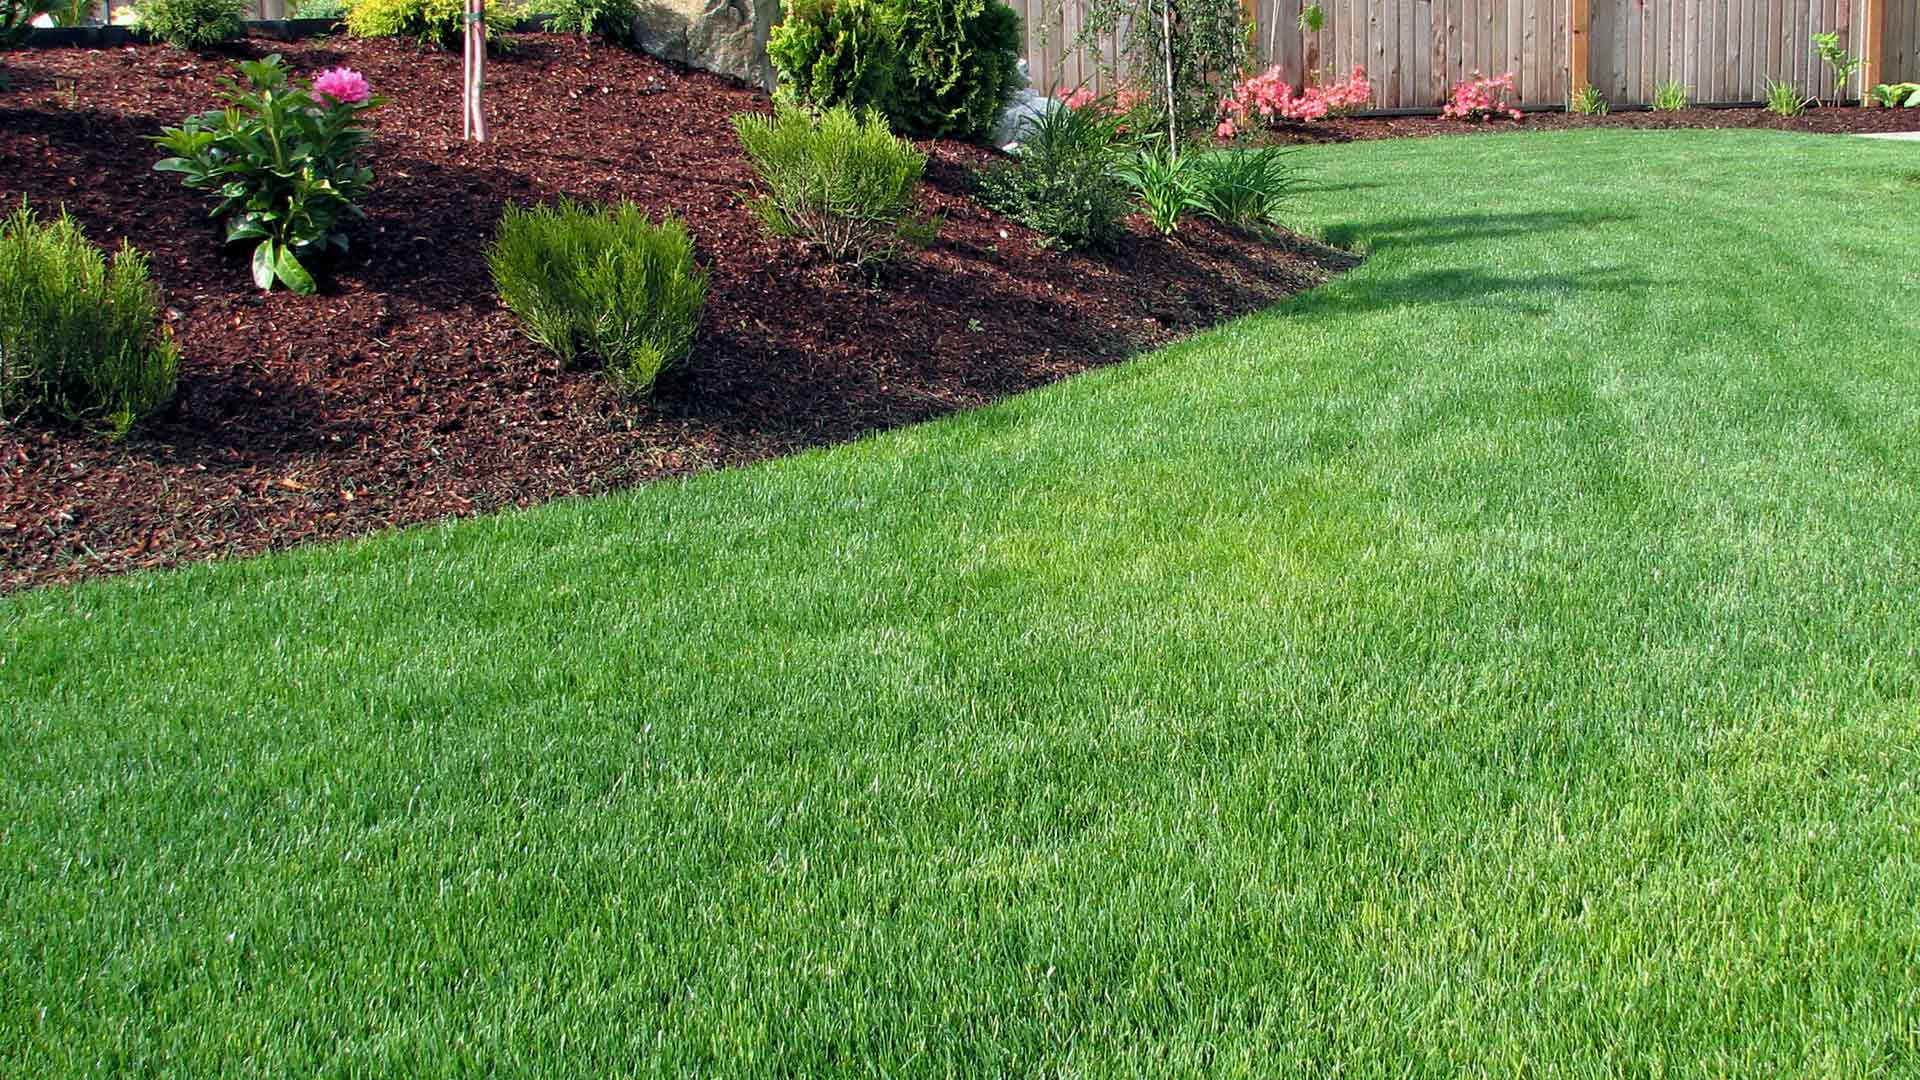 Landscape bed and lawn maintained by professionals in Springhurst, KY.